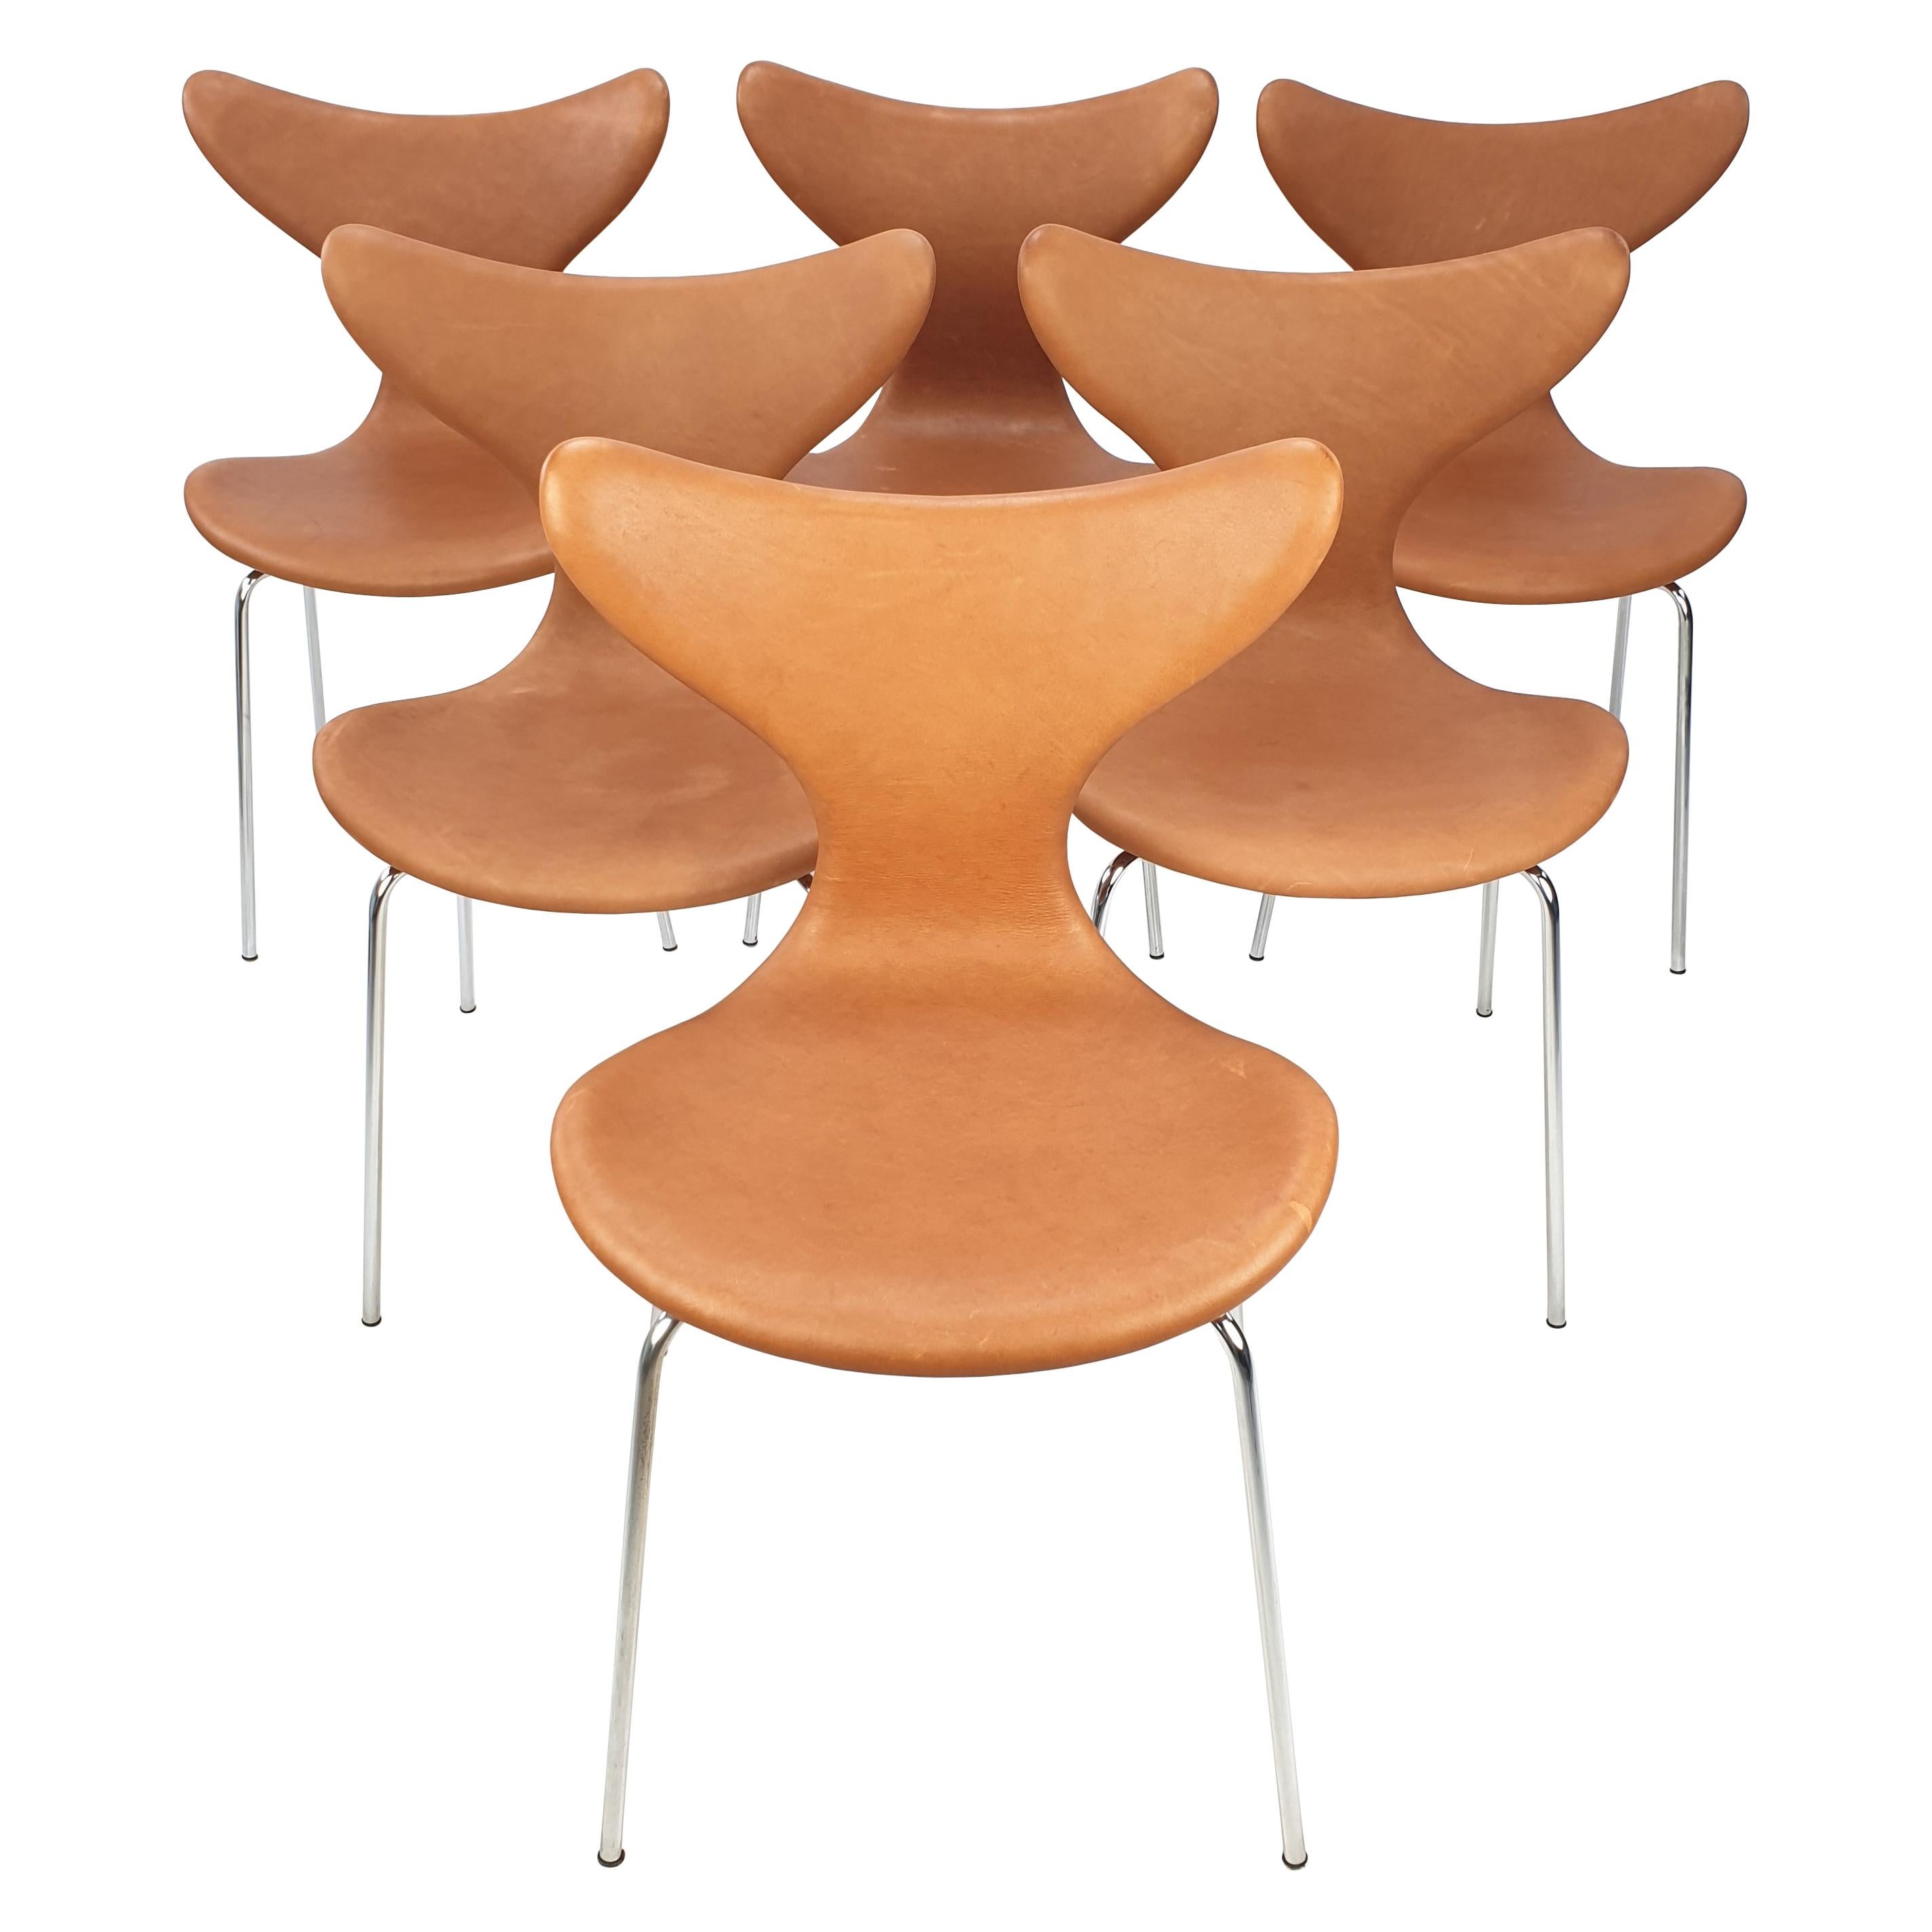 Set of 6 Lily Chairs by Arne Jacobsen for Fritz Hansen, 1960s